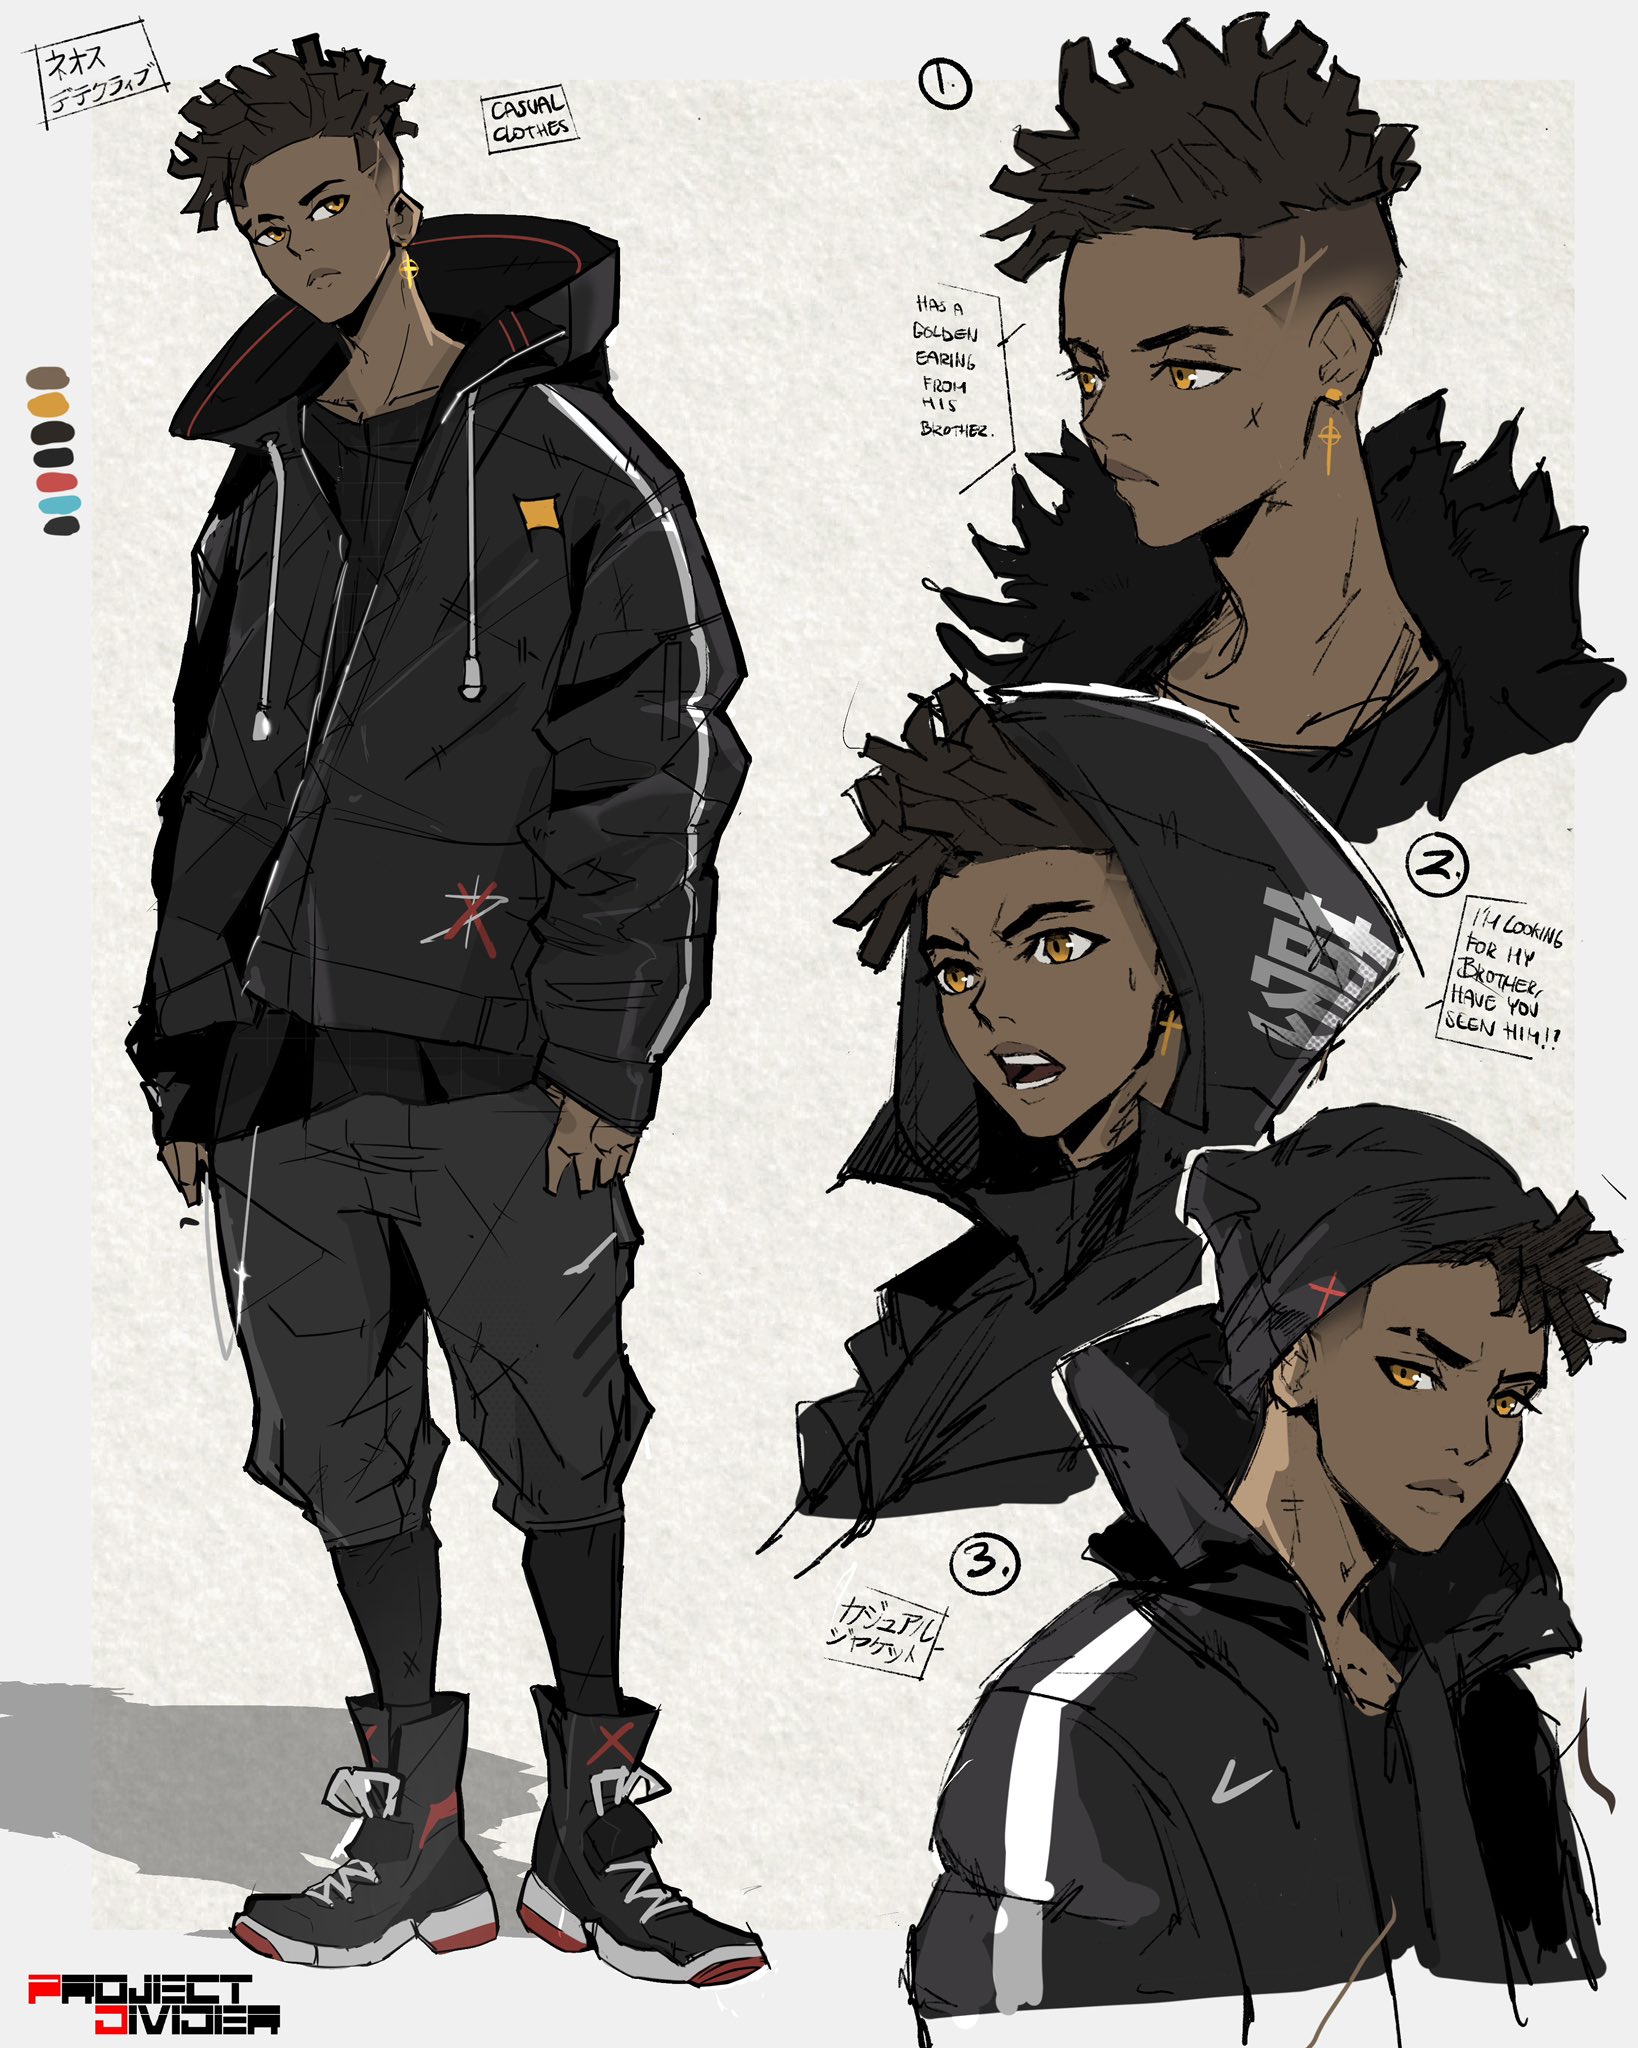 Mitch Divider on X: Kojo the bounty hunter. A character sheet